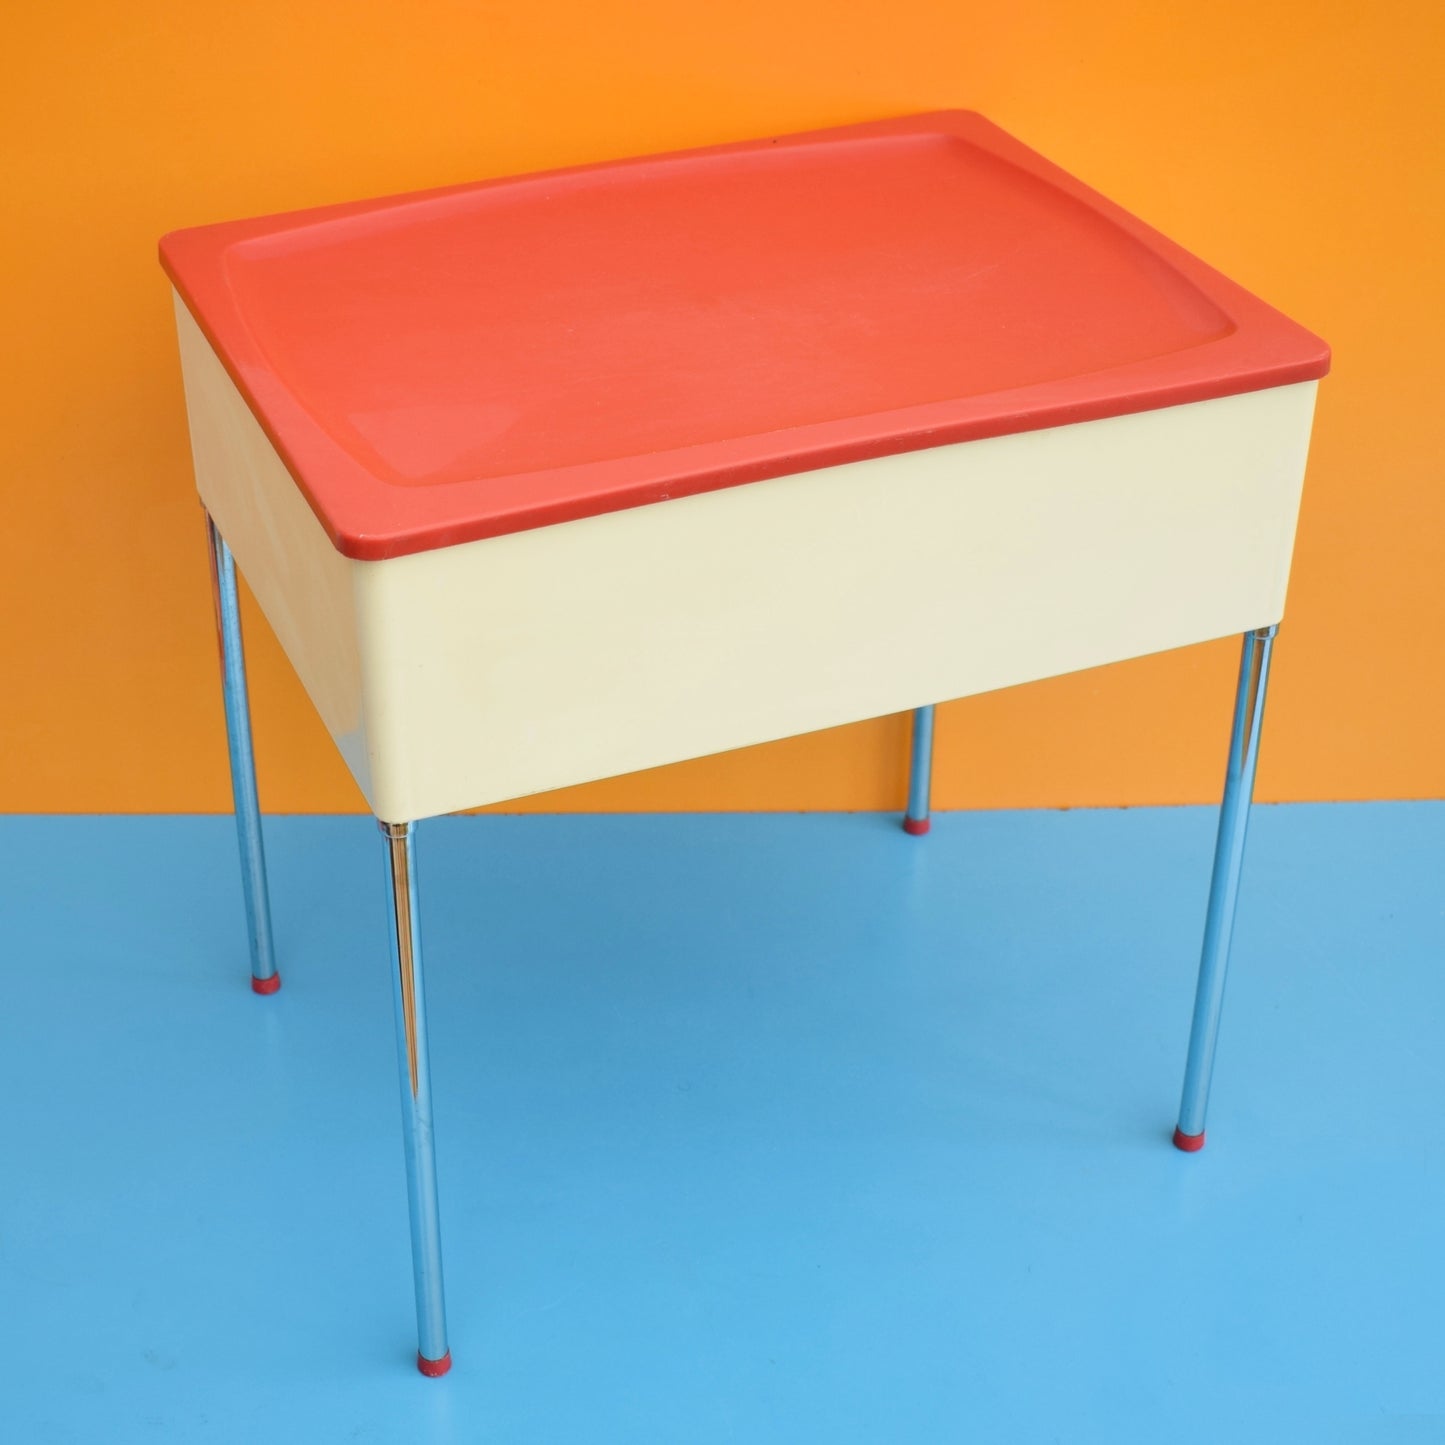 Vintage 1960s Folding Sewing? Table / Box- Bex